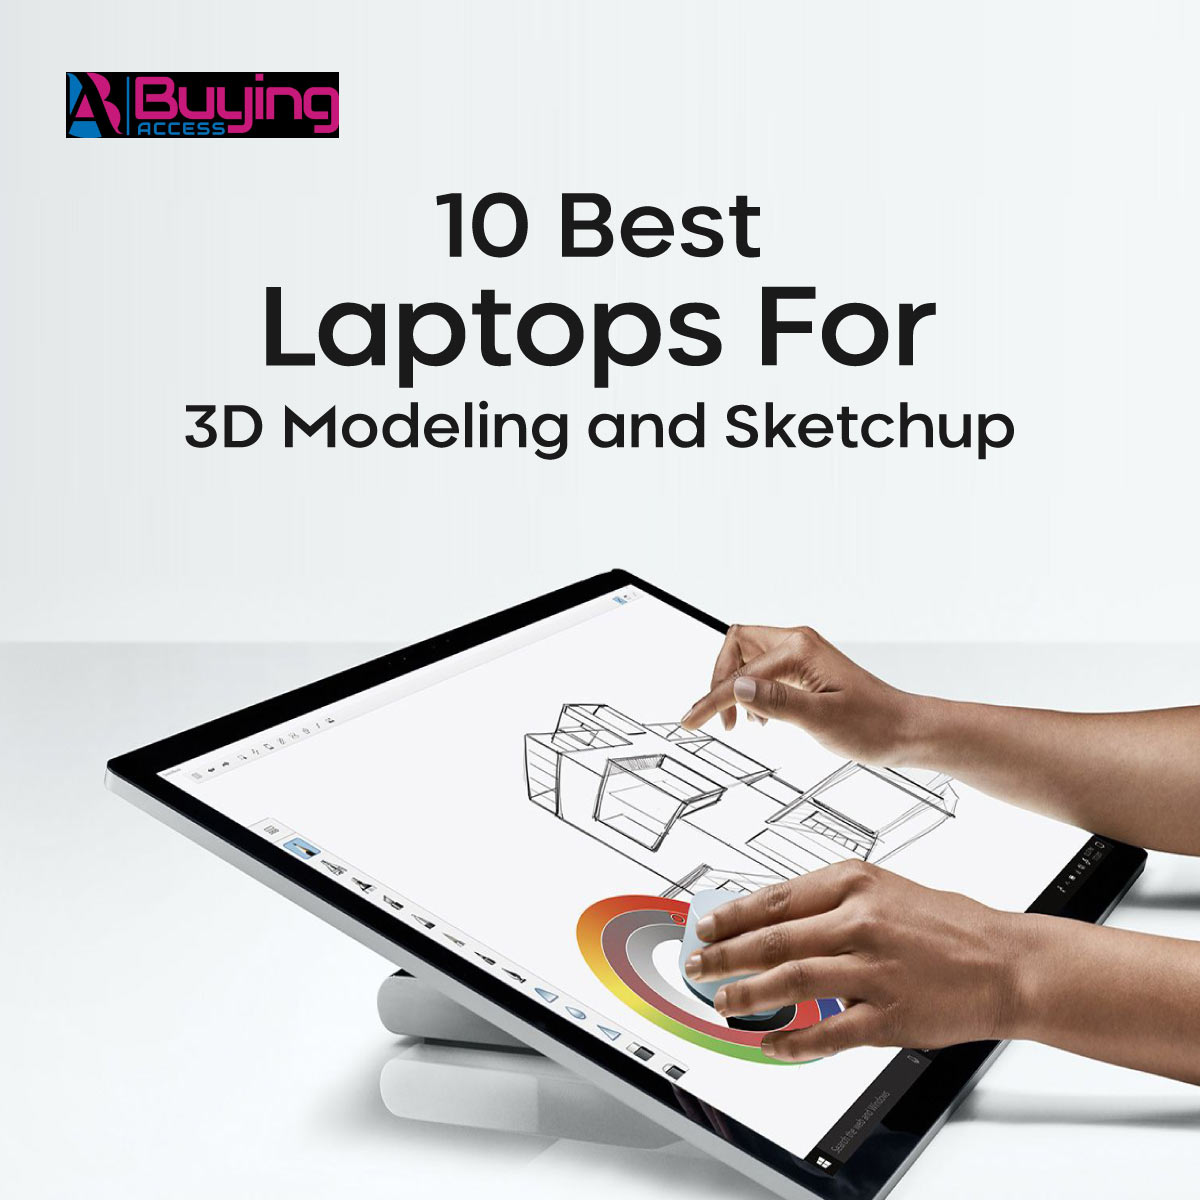 Laptops for 3D Modeling and Sketch-up